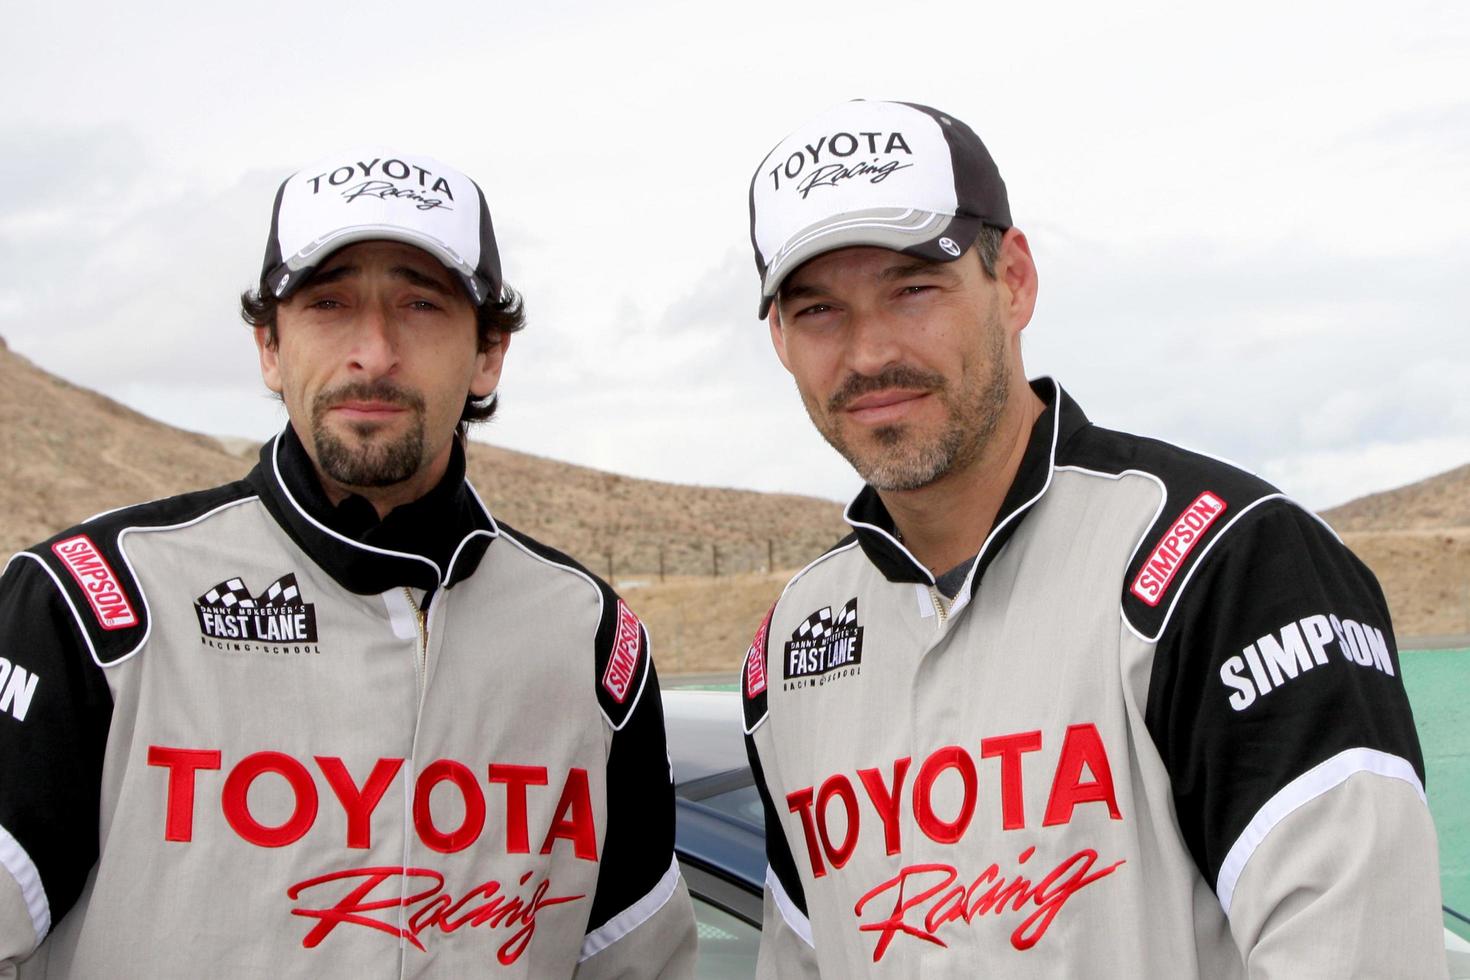 LOS ANGELES, MAR 17 - Adrien Brody Eddie Cibrian at the training session for the 36th Toyota Pro Celebrity Race to be held in Long Beach, CA on April 14, 2012 at the Willow Springs Racetrack on March 17, 2012 in Willow Springs, CA photo